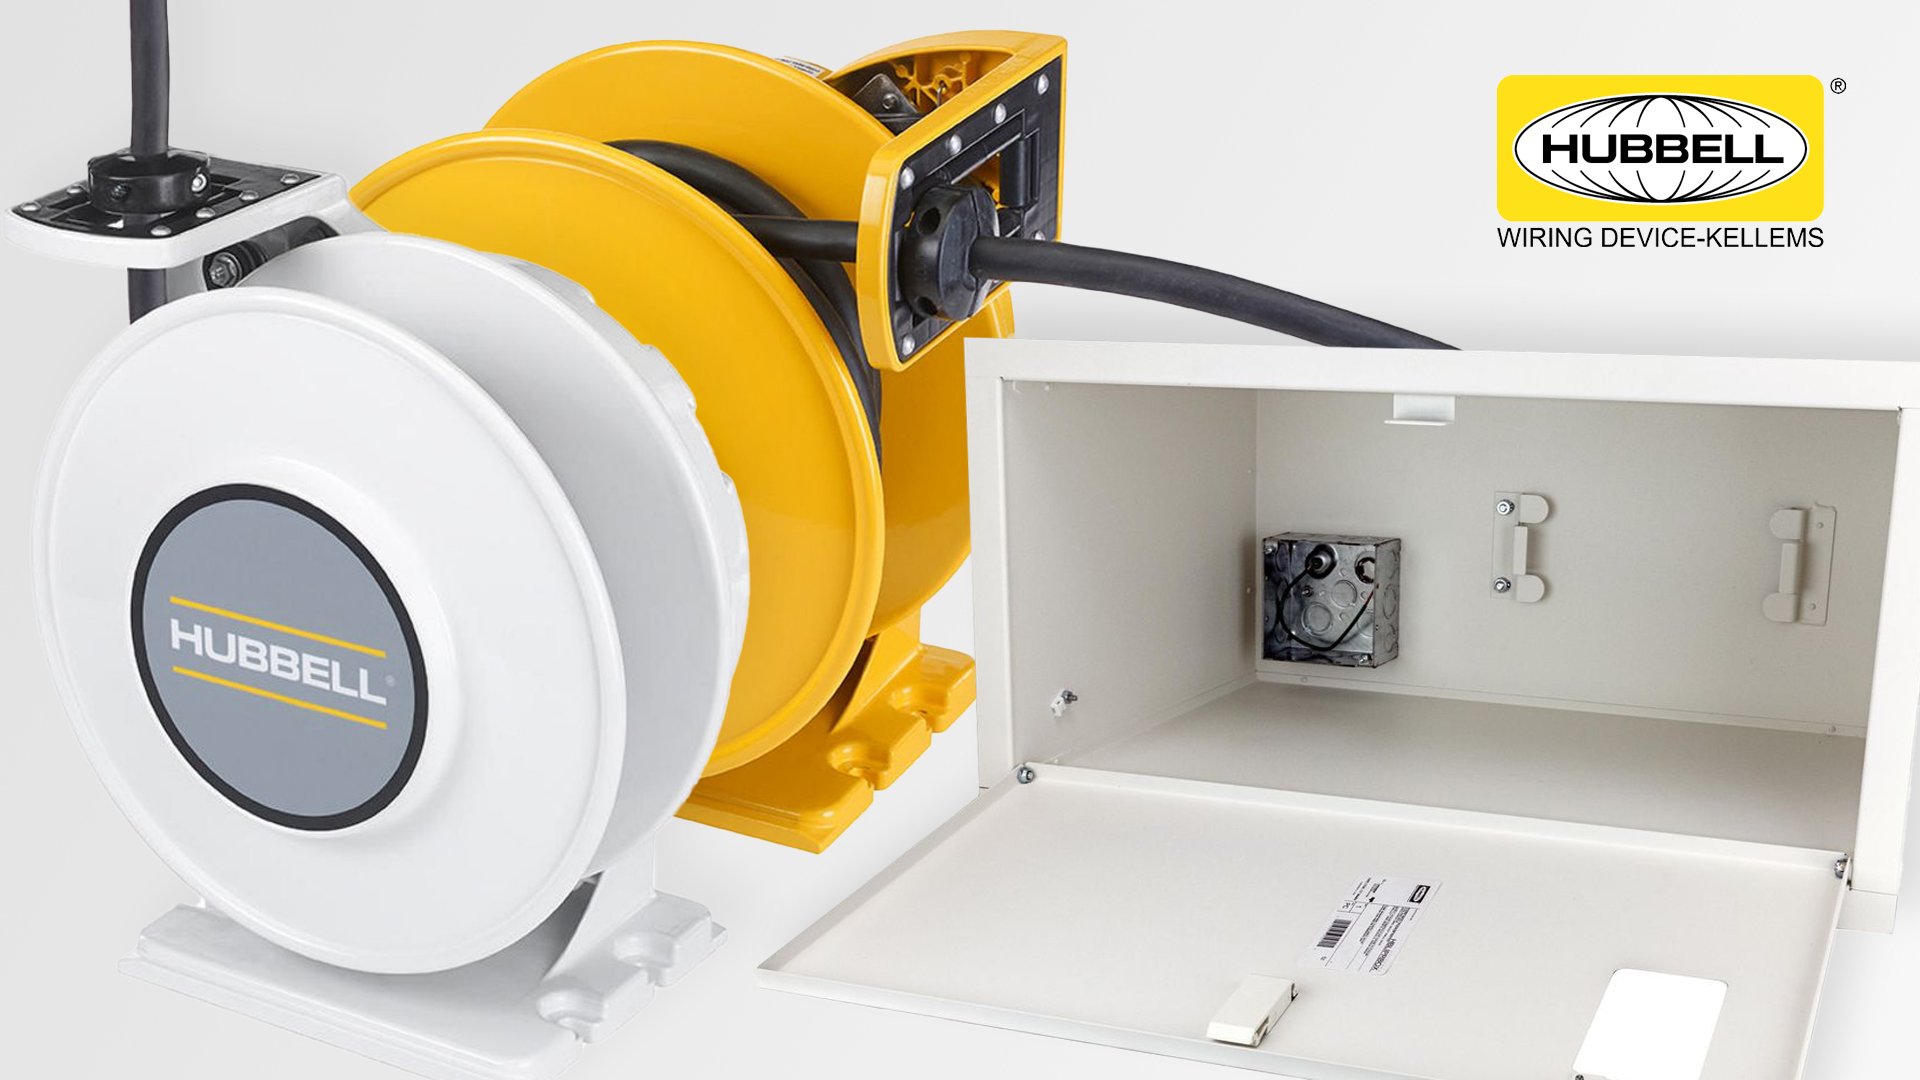 New generation of ceiling mounted cord reels provide real solutions